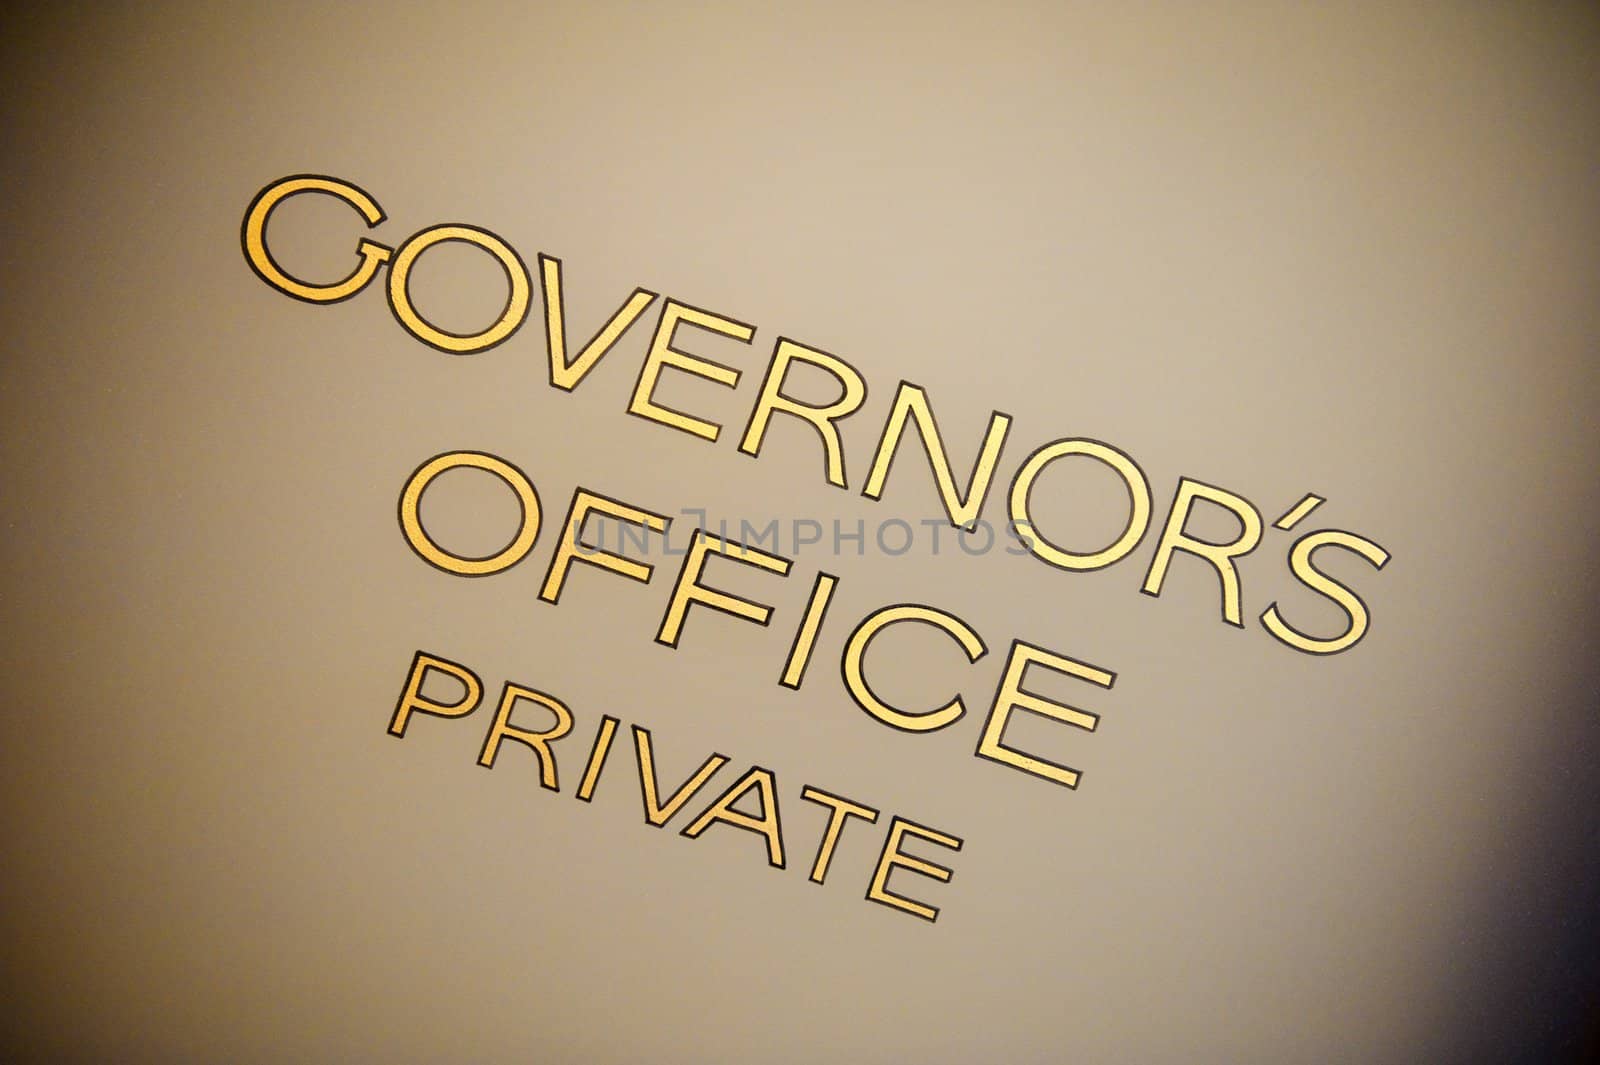 Old, hand painted lettering on the governor's door marked as private